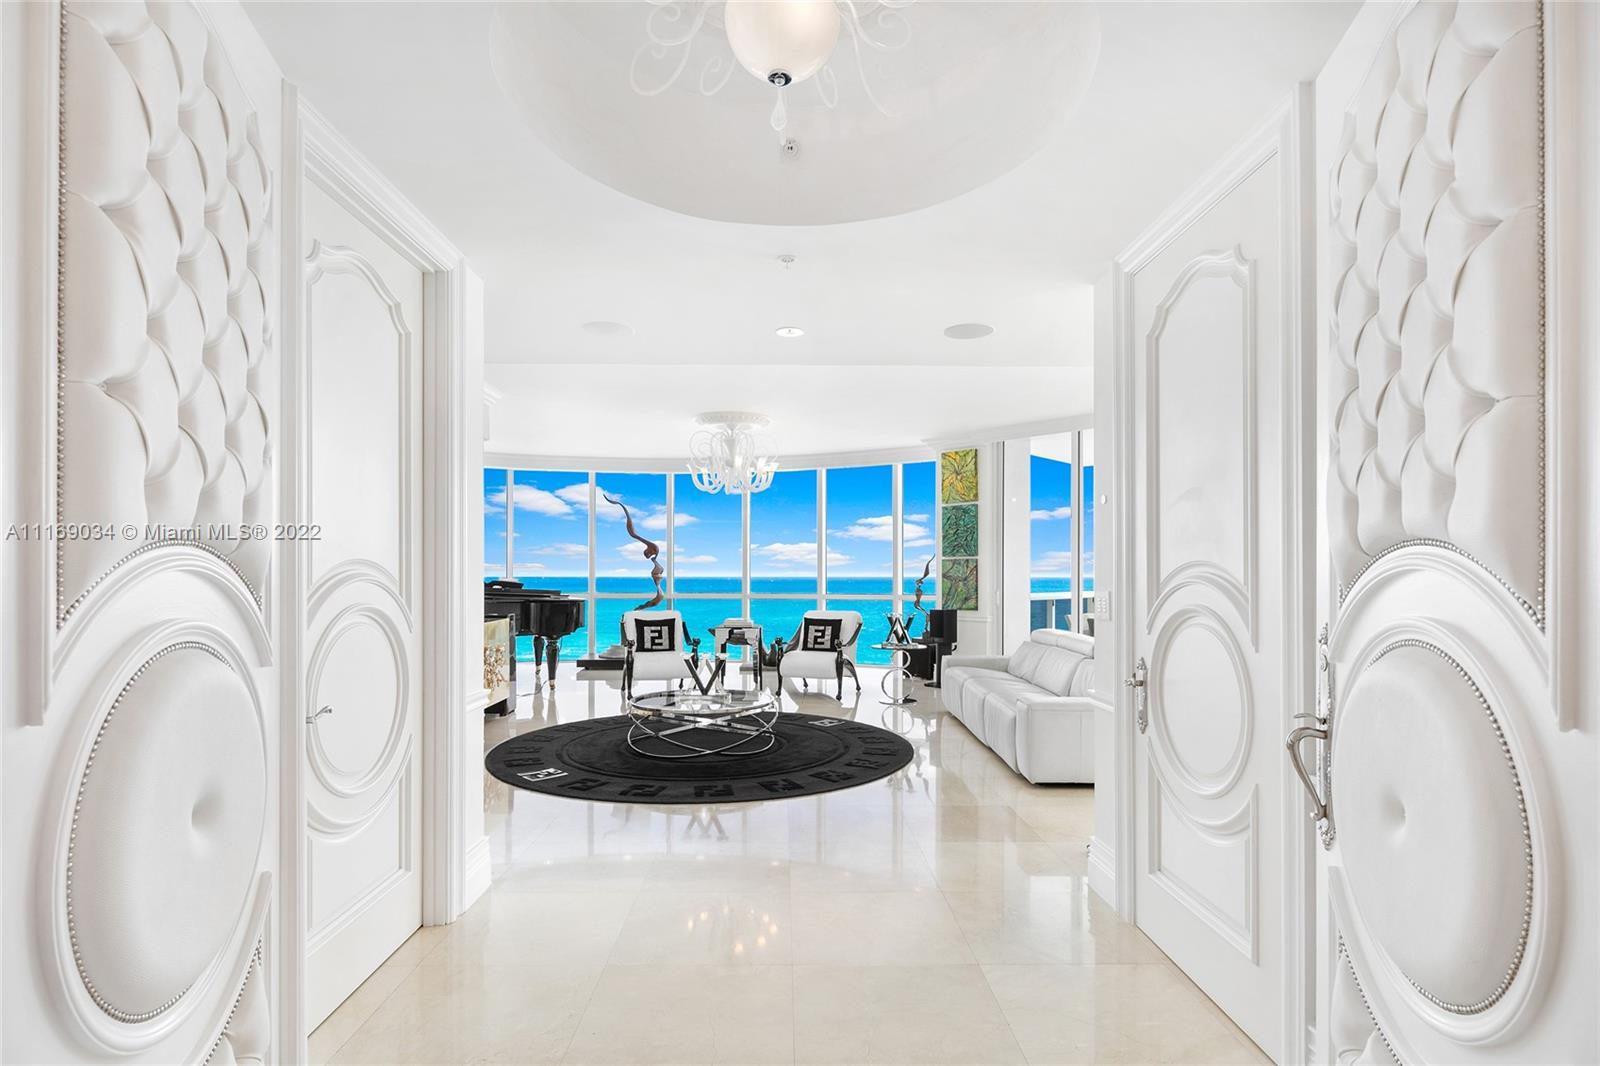 Welcome to the ultra-luxurious oceanfront condo at the prestigious Trump Palace in Sunny Isles Beach